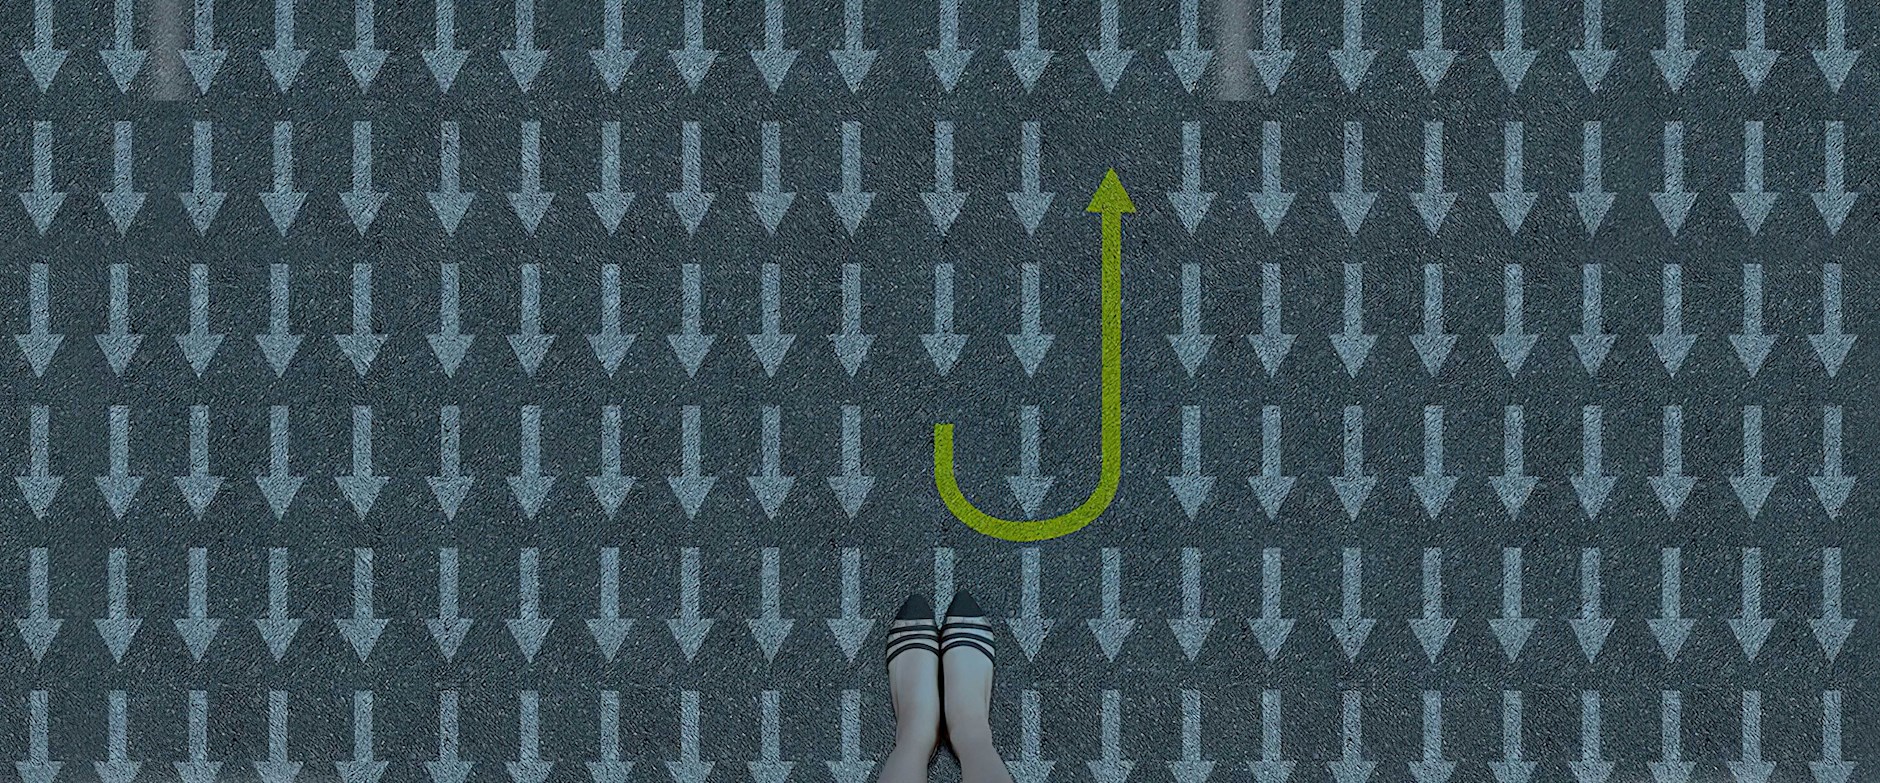 High-heeled shoes at the bottom over a field of downward-facing arrows; a single green arrow points up